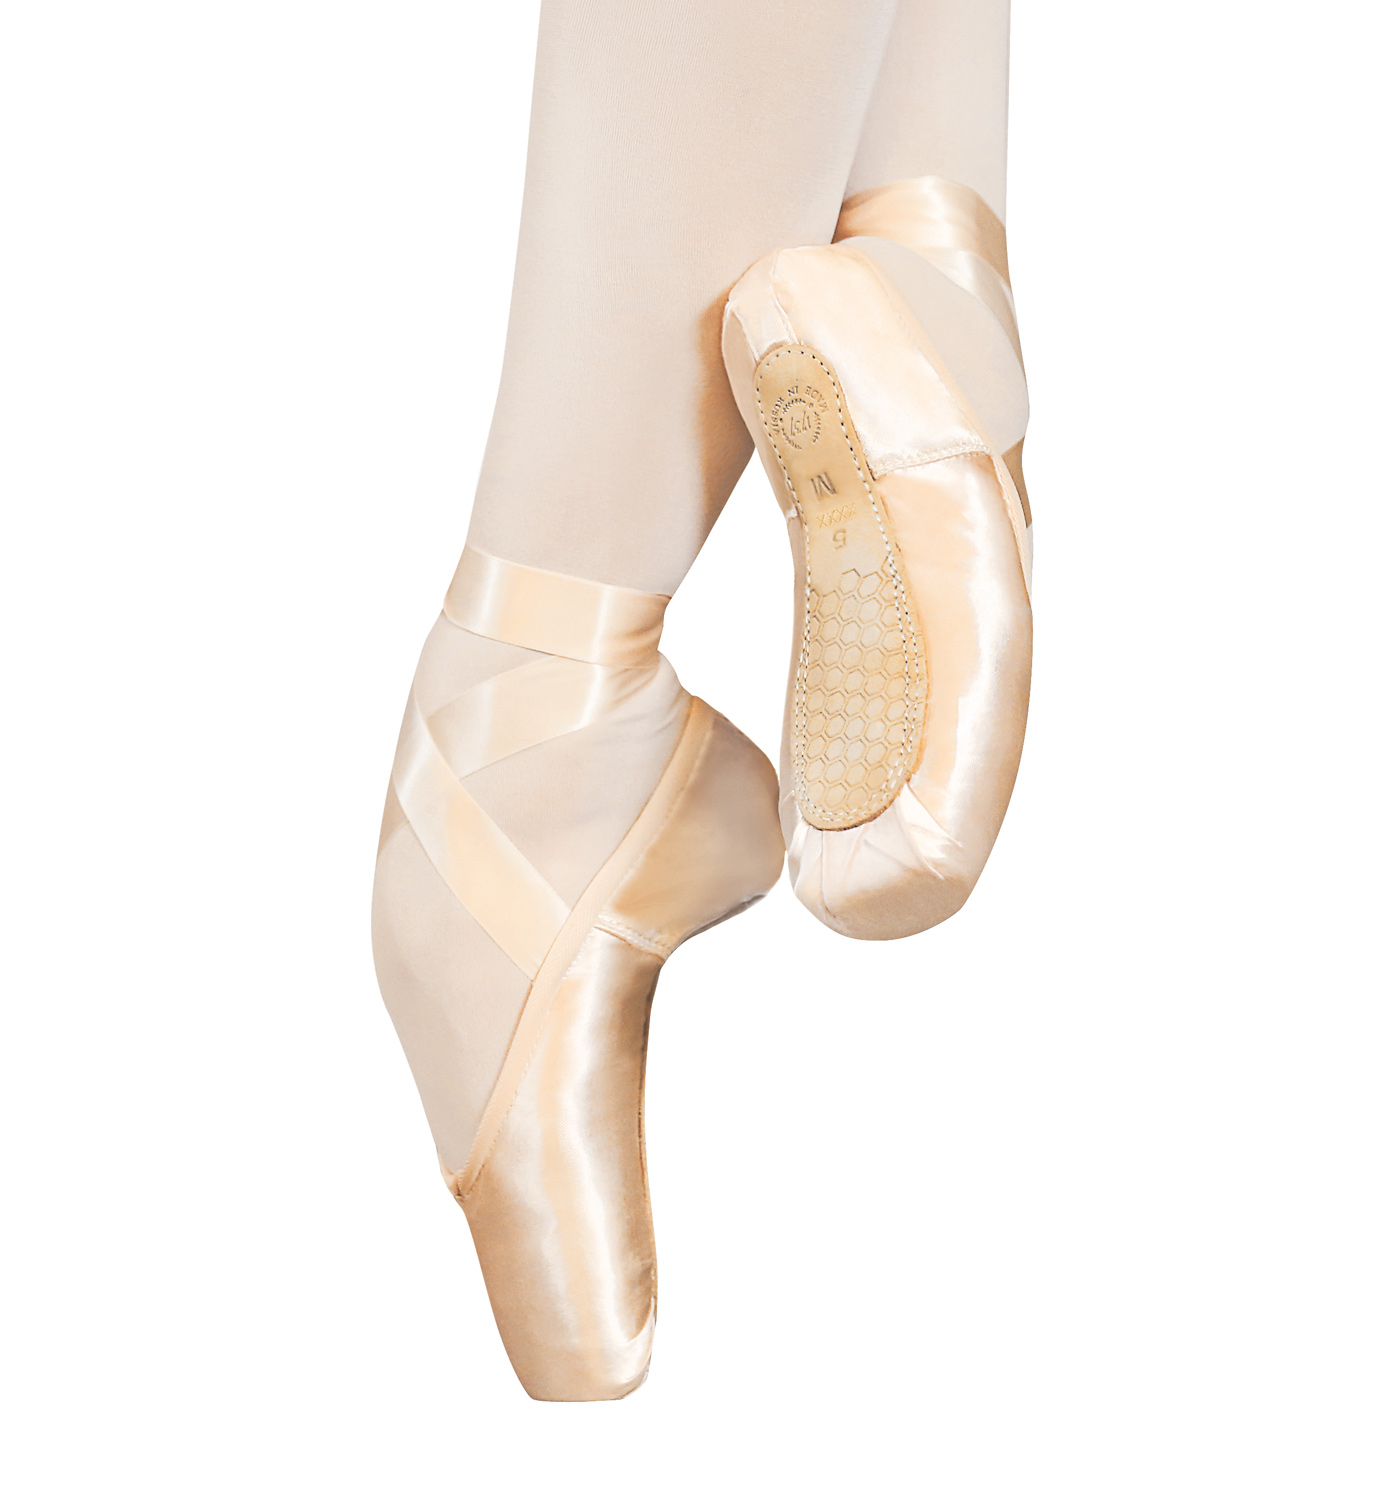 The Grishko 1737 Collection | Pointe Shoe Brands